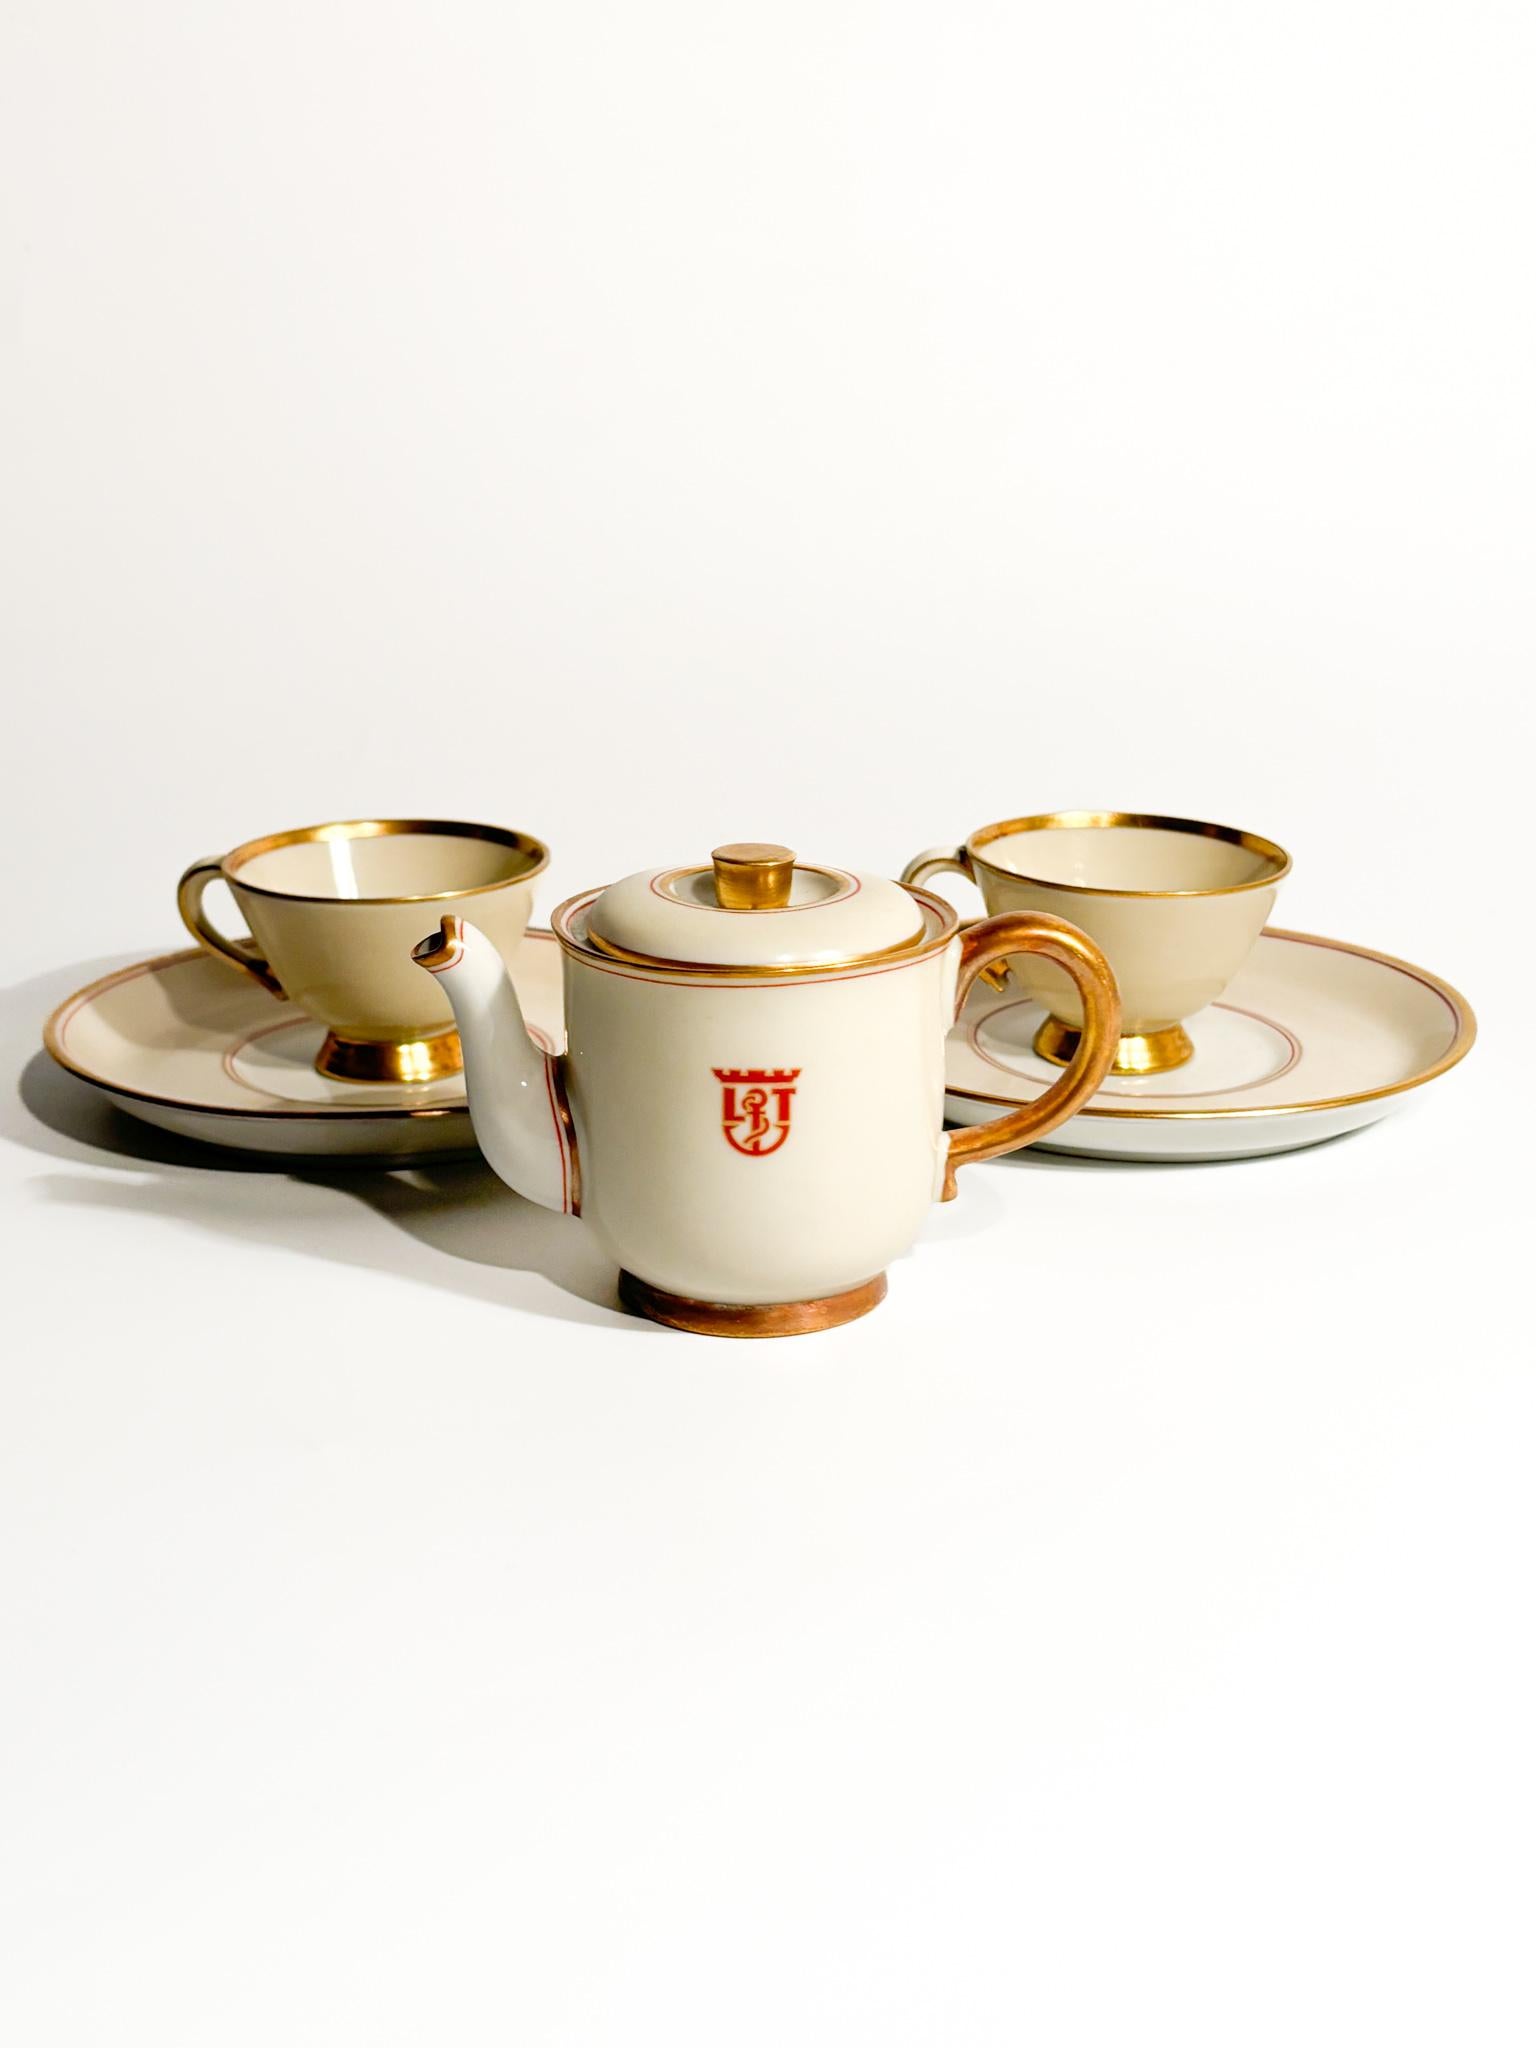 Pair of cups and coffee pot belonging to the porcelain service created by Gio Ponti - Richard Ginori for Lloyd Triestino's ship Victoria in the 1930s.

The first ship Victoria was built in the late 1920s and entered service in 1932. It was designed